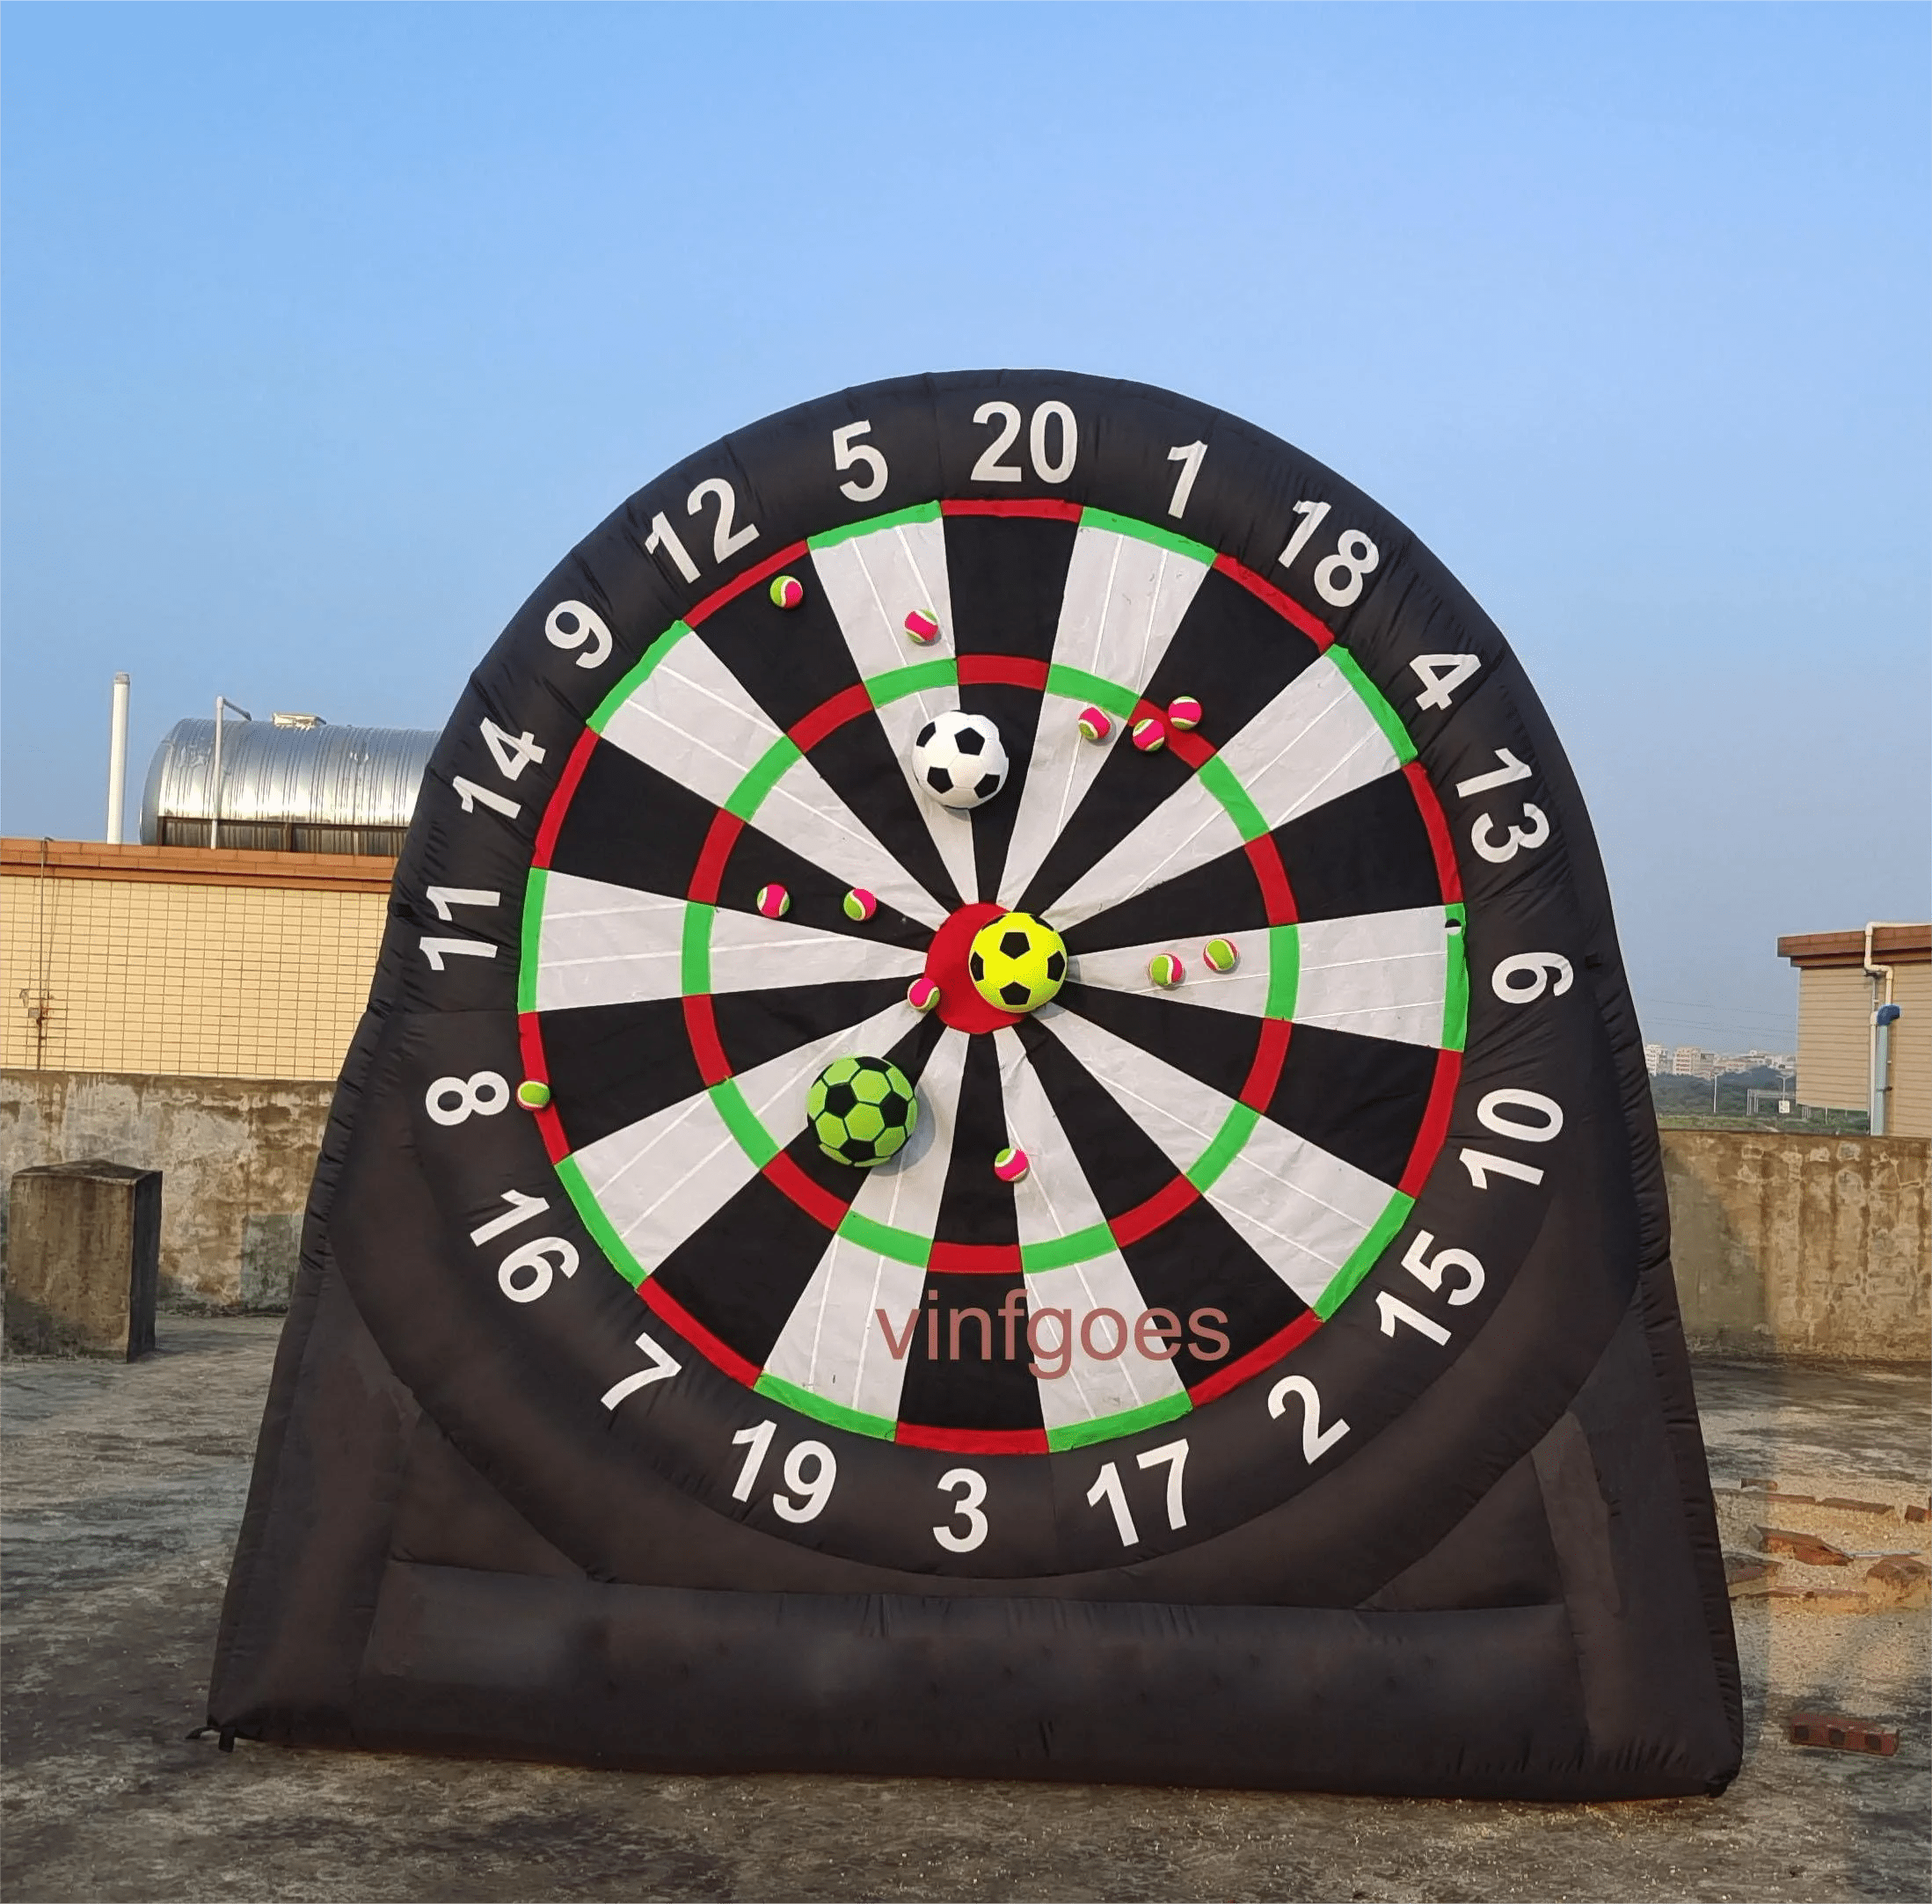 HomeBound Essentials 5m(16.5ft) Giant Inflatable Soccer Darts Board Set - Outdoor Target Game with Blower and Sticky Balls